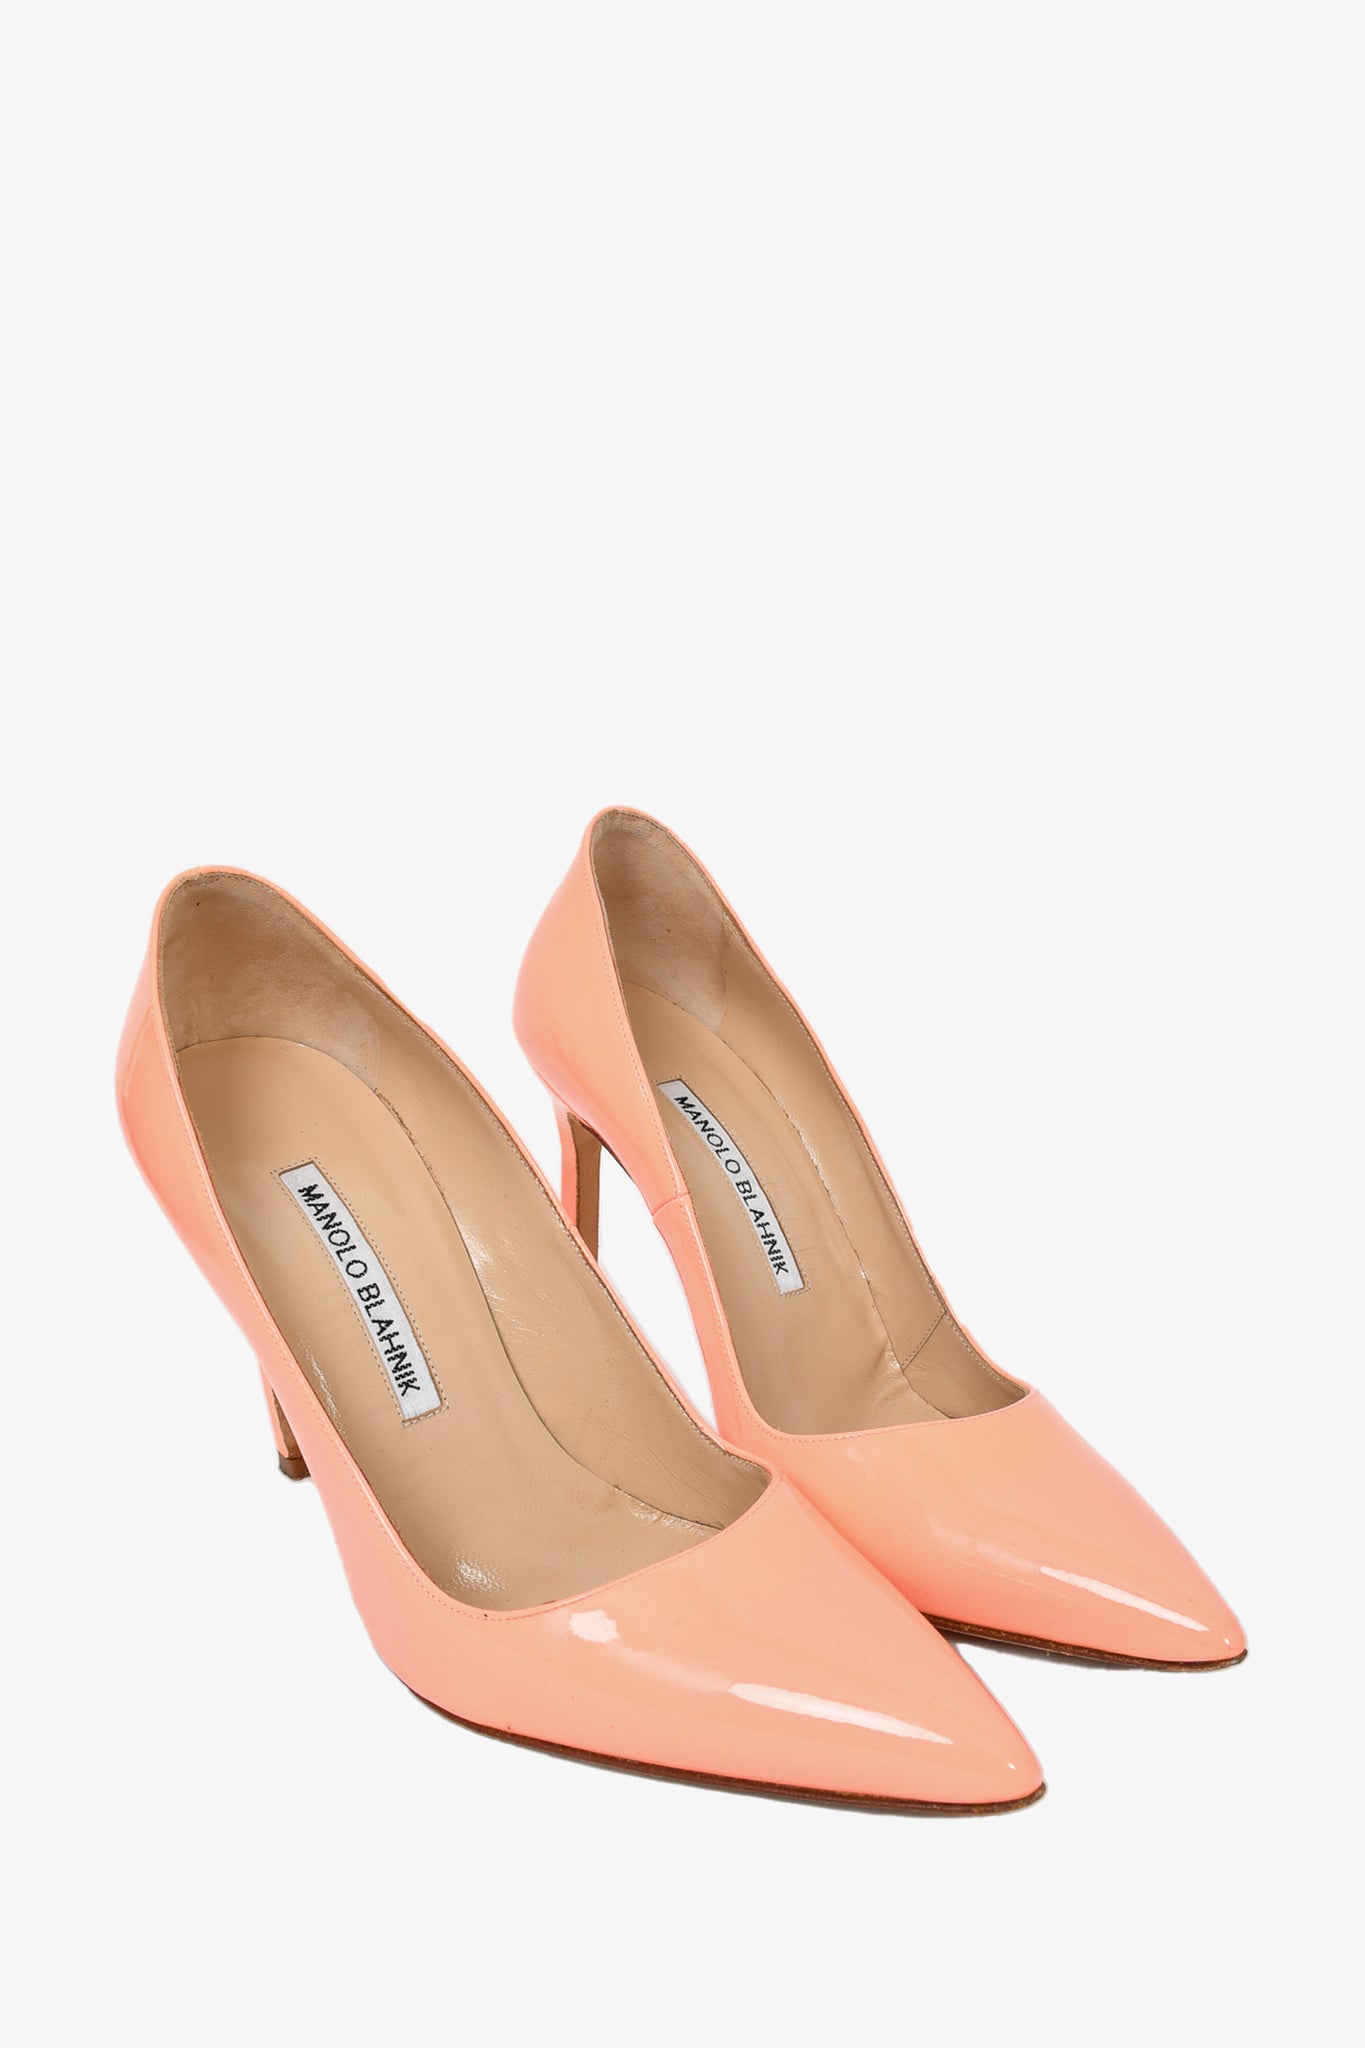 Manolo Blahnik Coral Patent Heels Size 35 – Mine & Yours